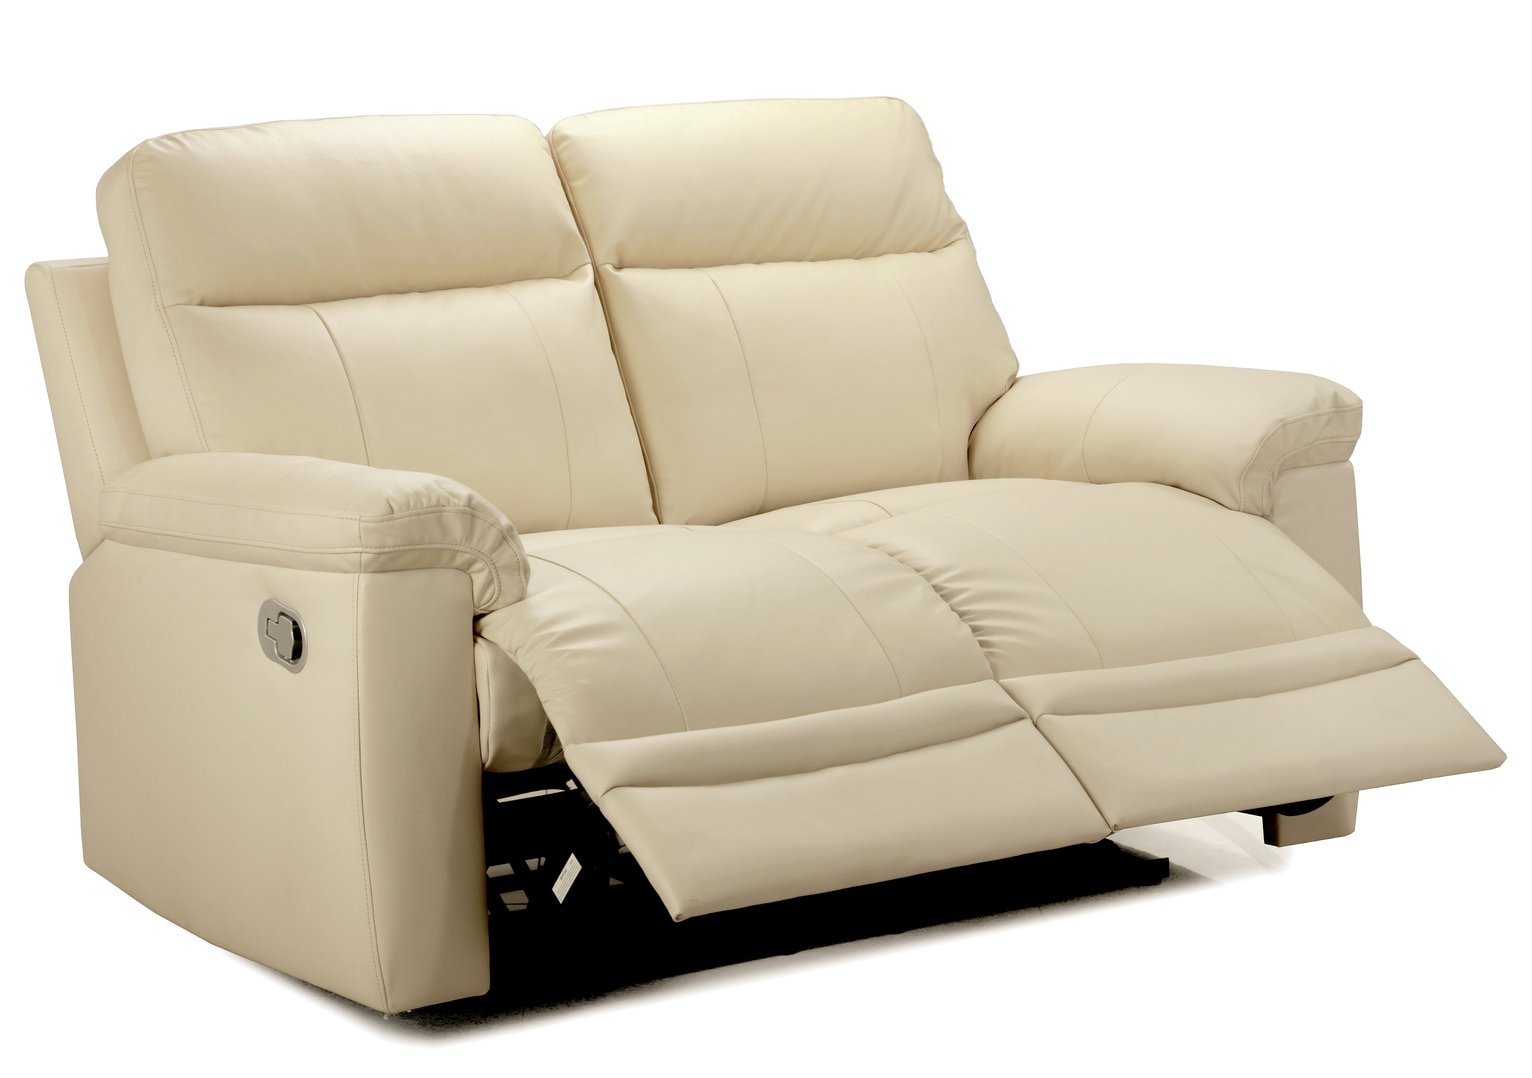 Argos Home Paolo 2 Seater Manual Recliner Sofa - Ivory